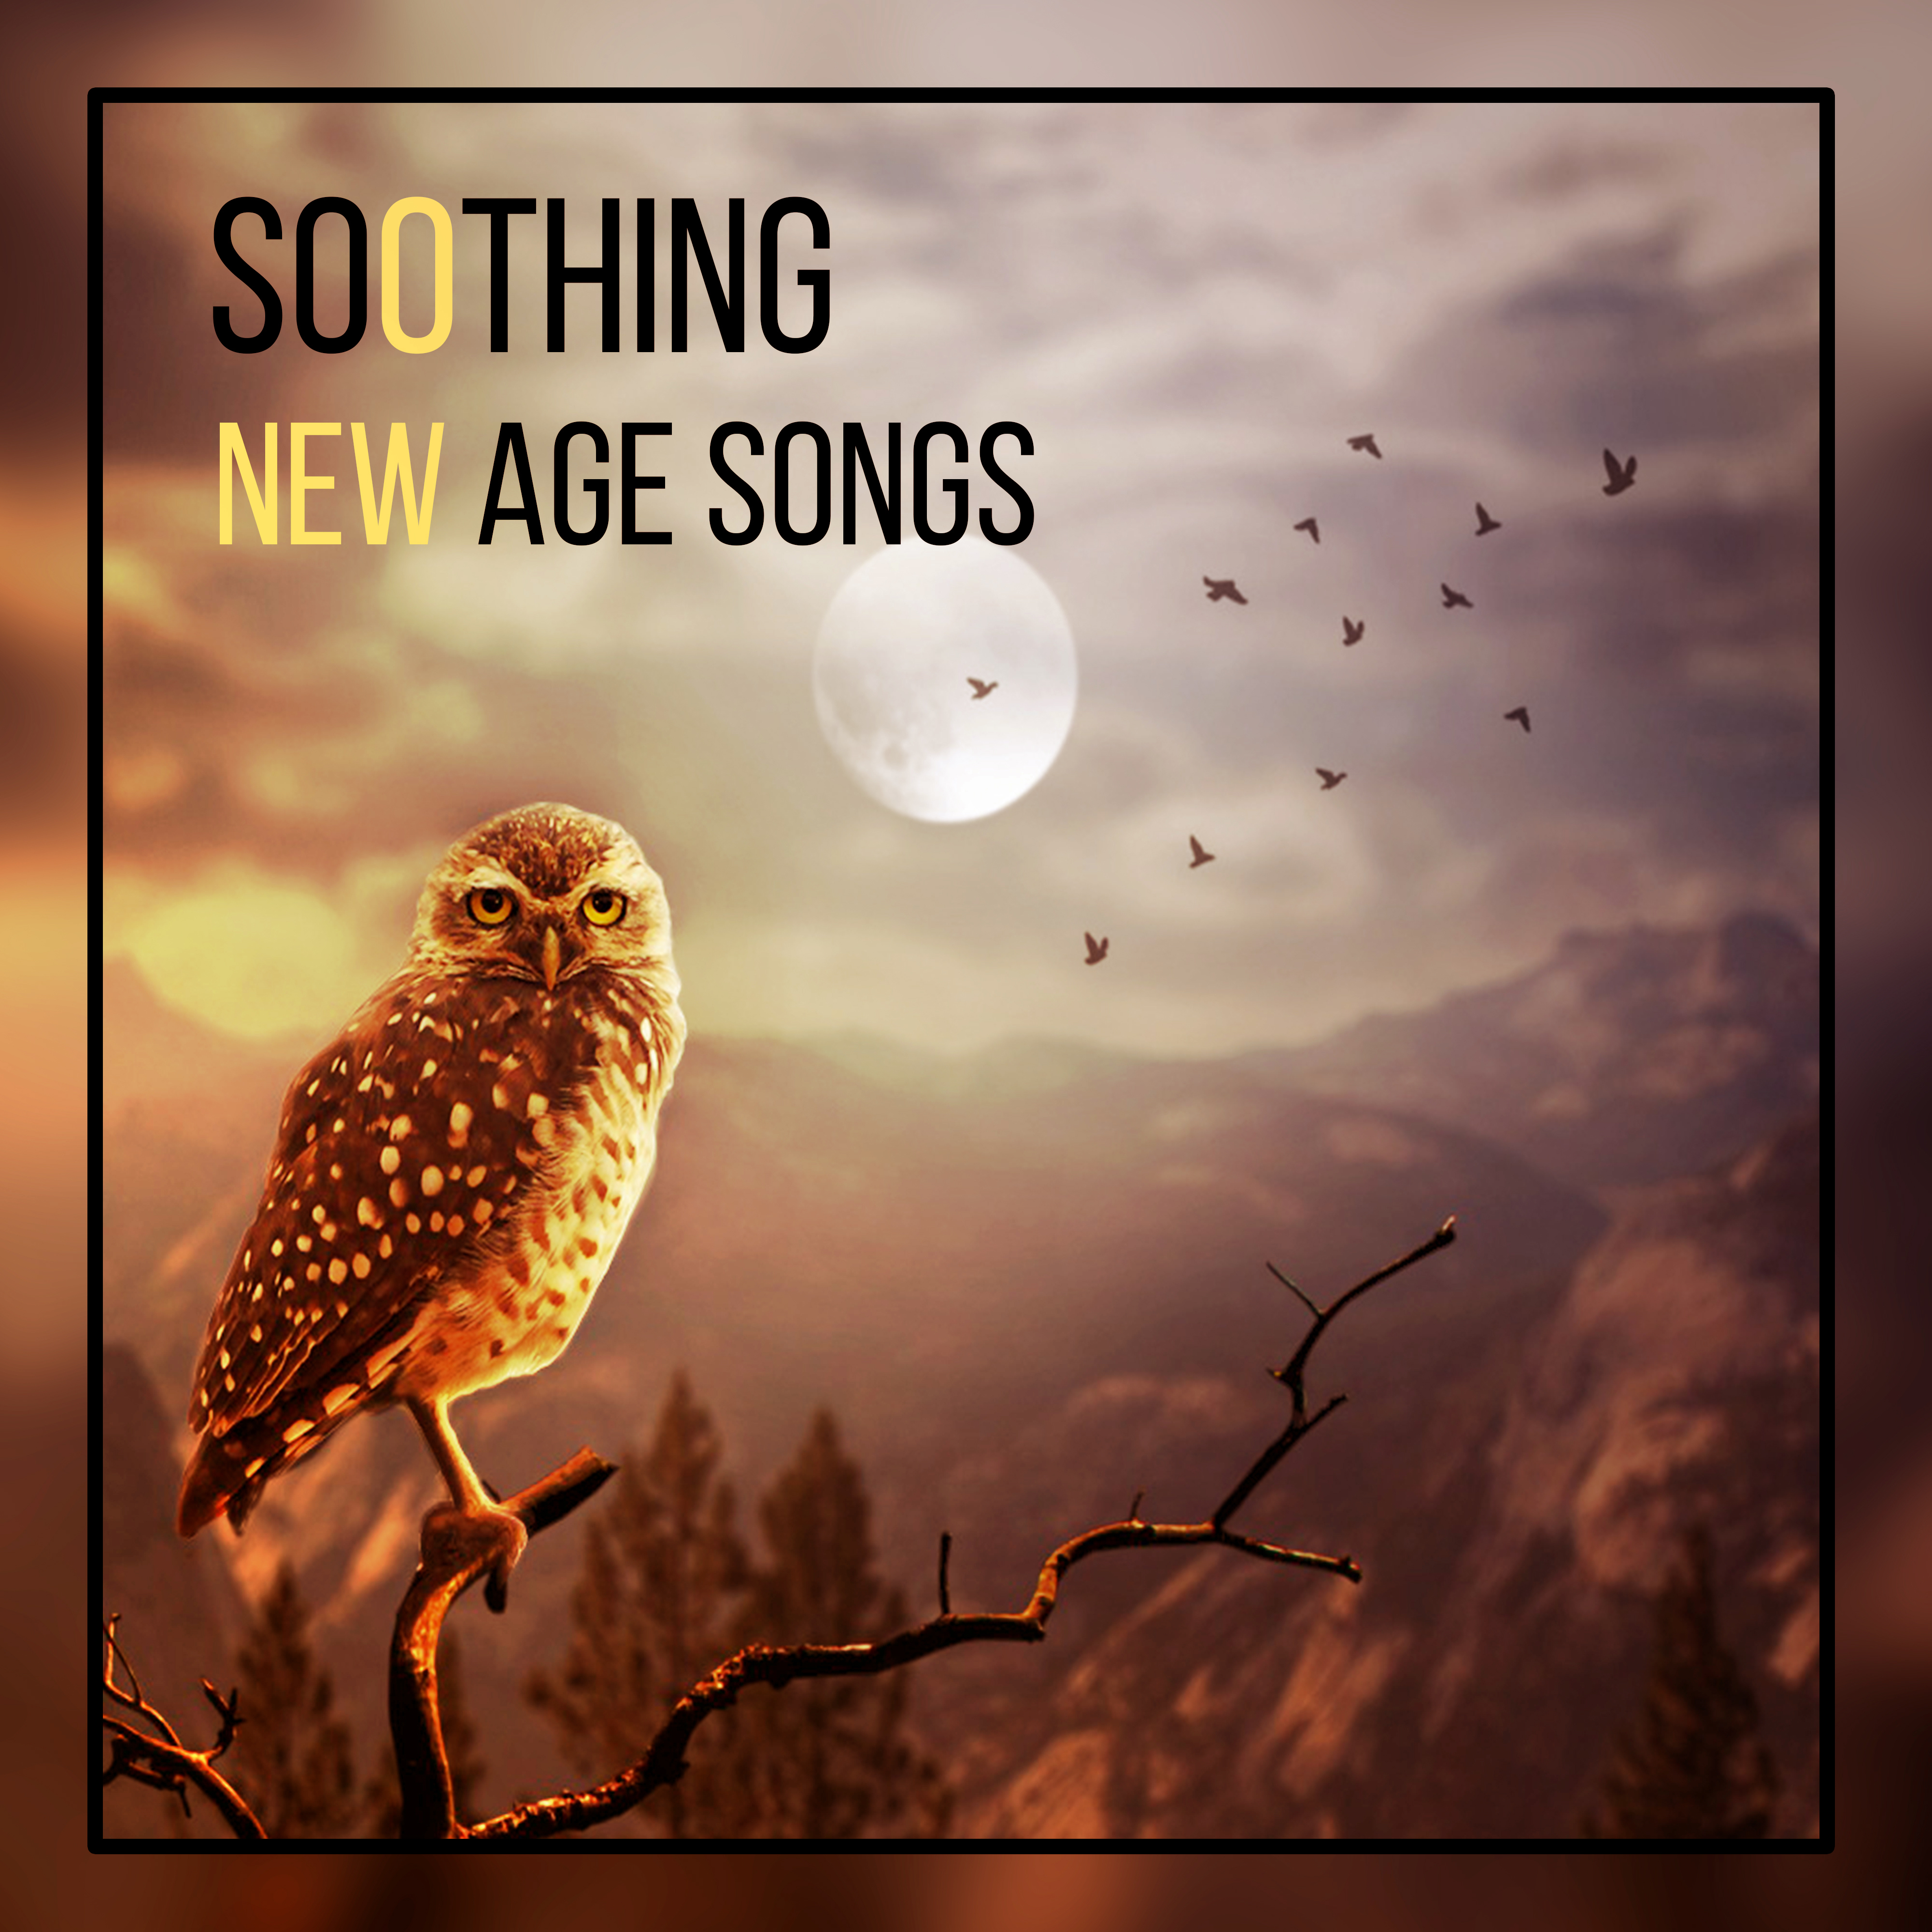 Soothing New Age Songs – New Age Music to Deep Sleep, Dreaming All Night, Sleep Well, Night Relaxation